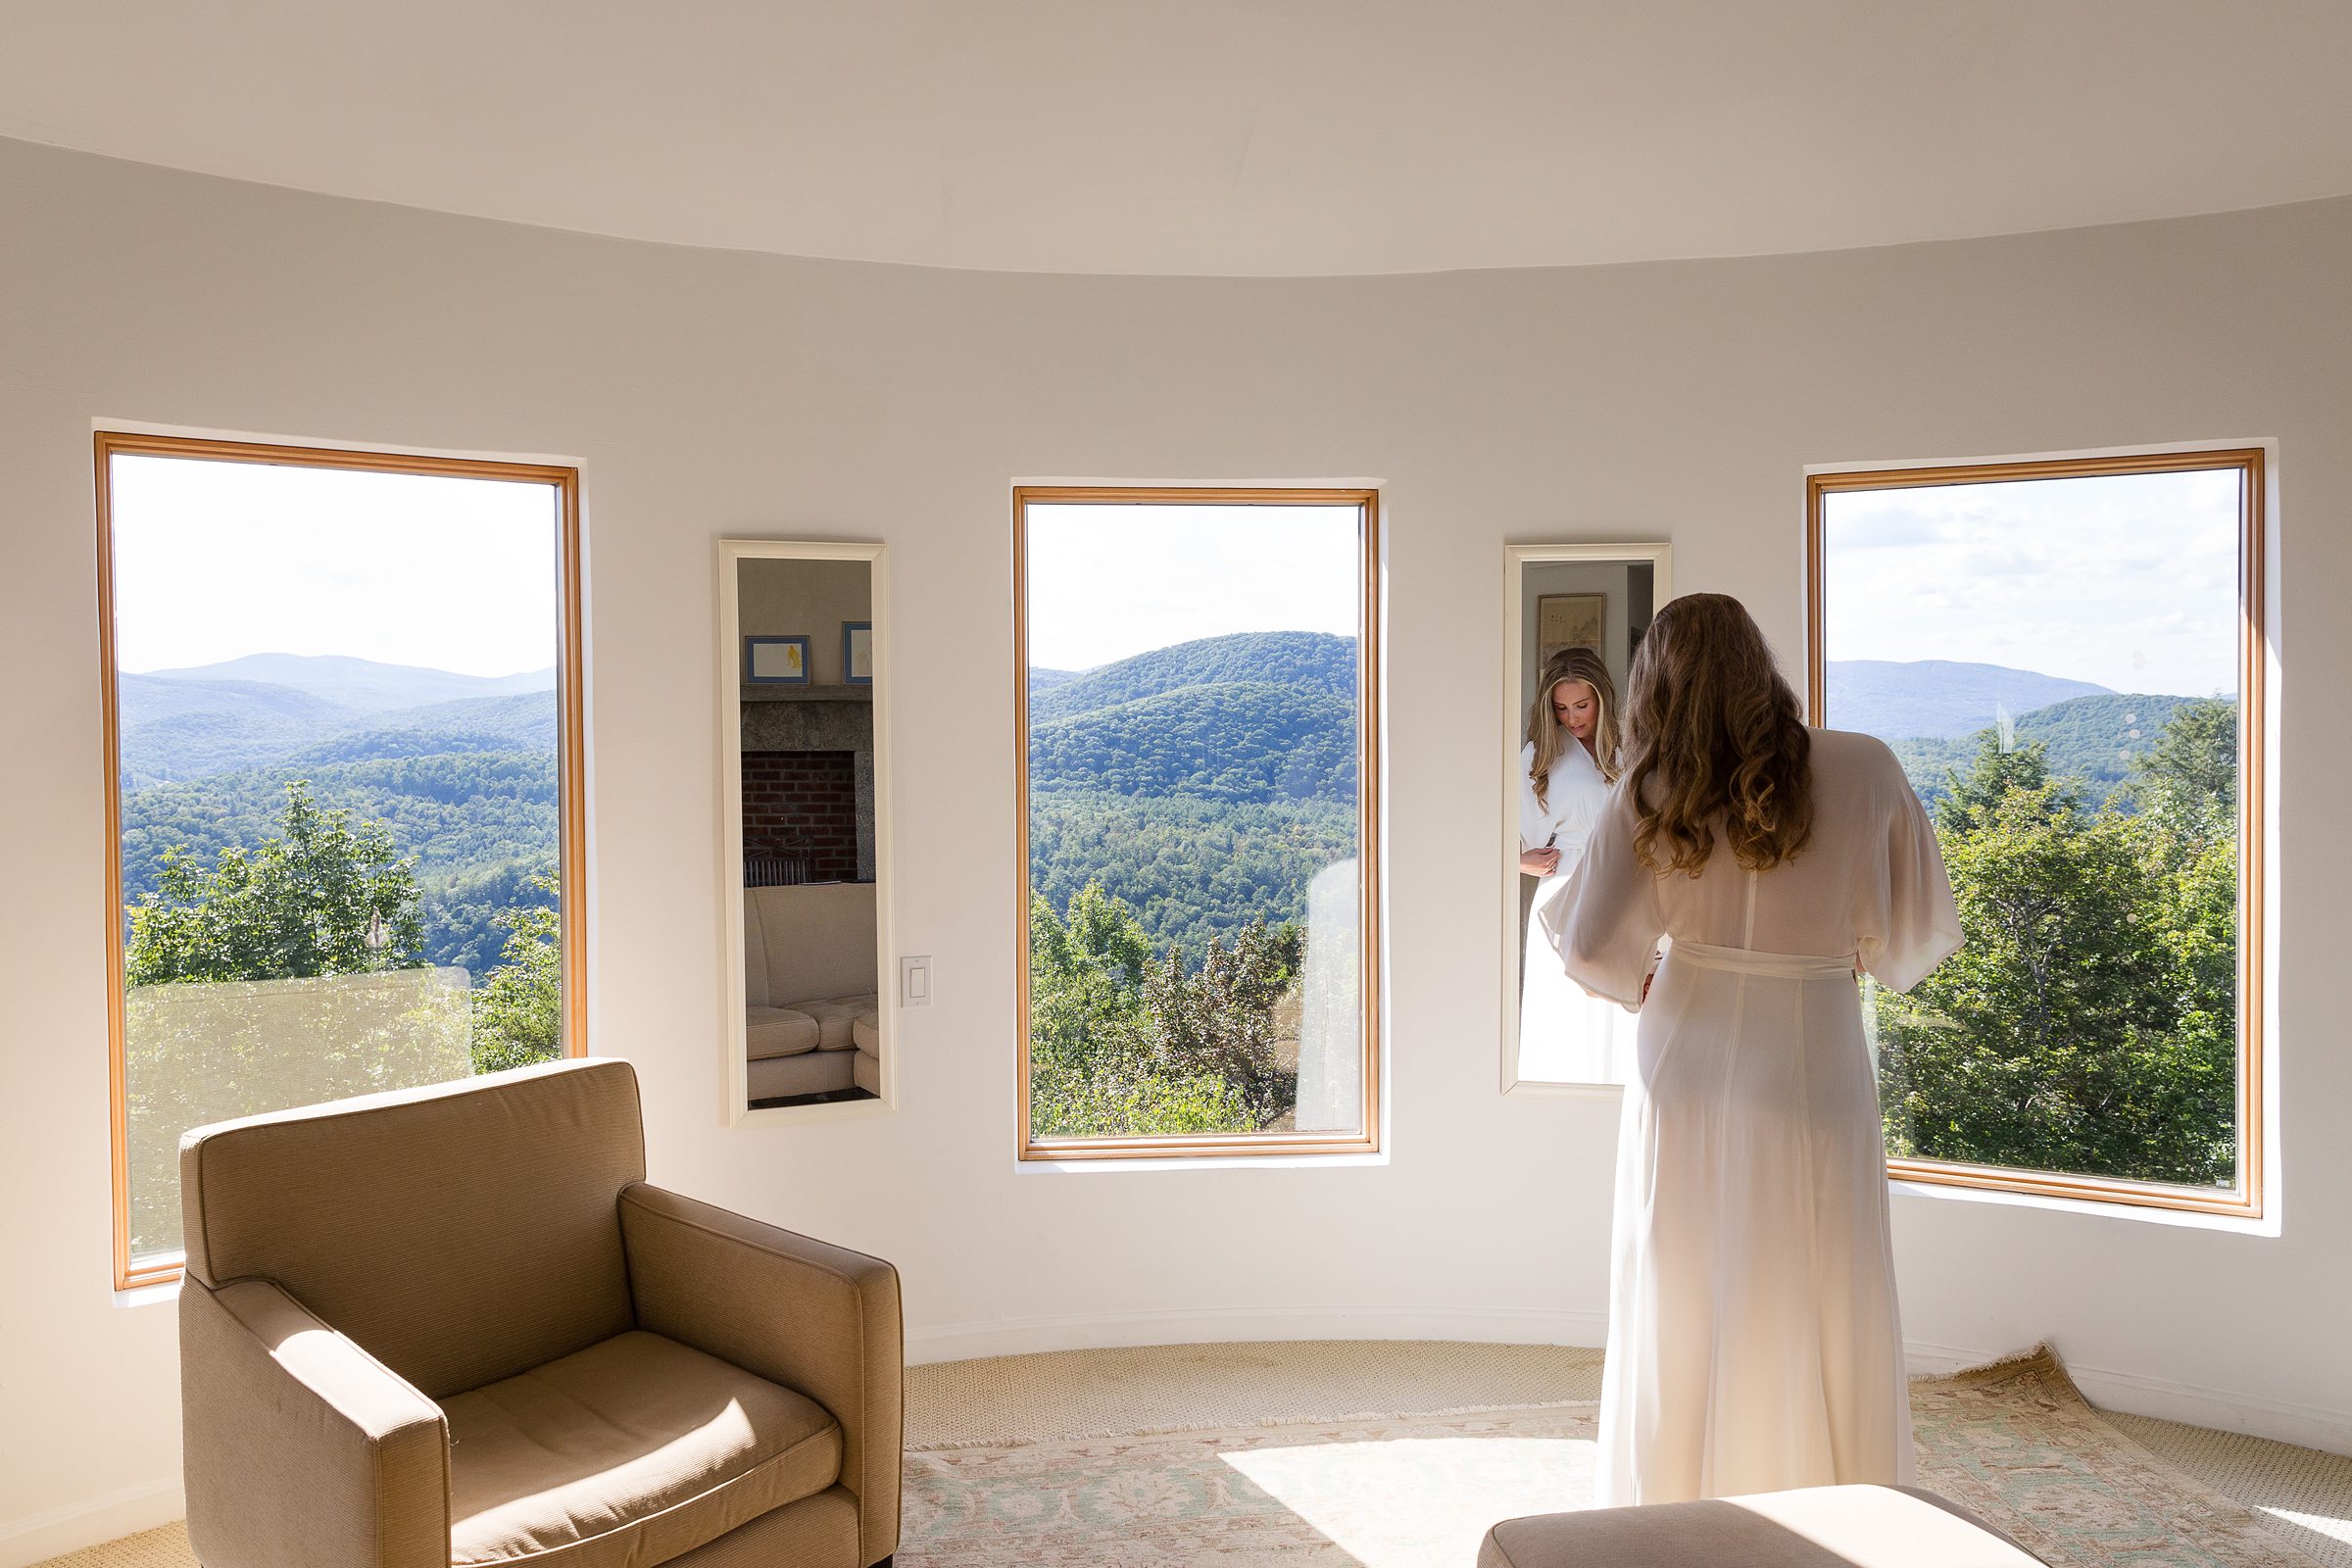 bride getting ready for elopement wedding looking out the window with mountain views 